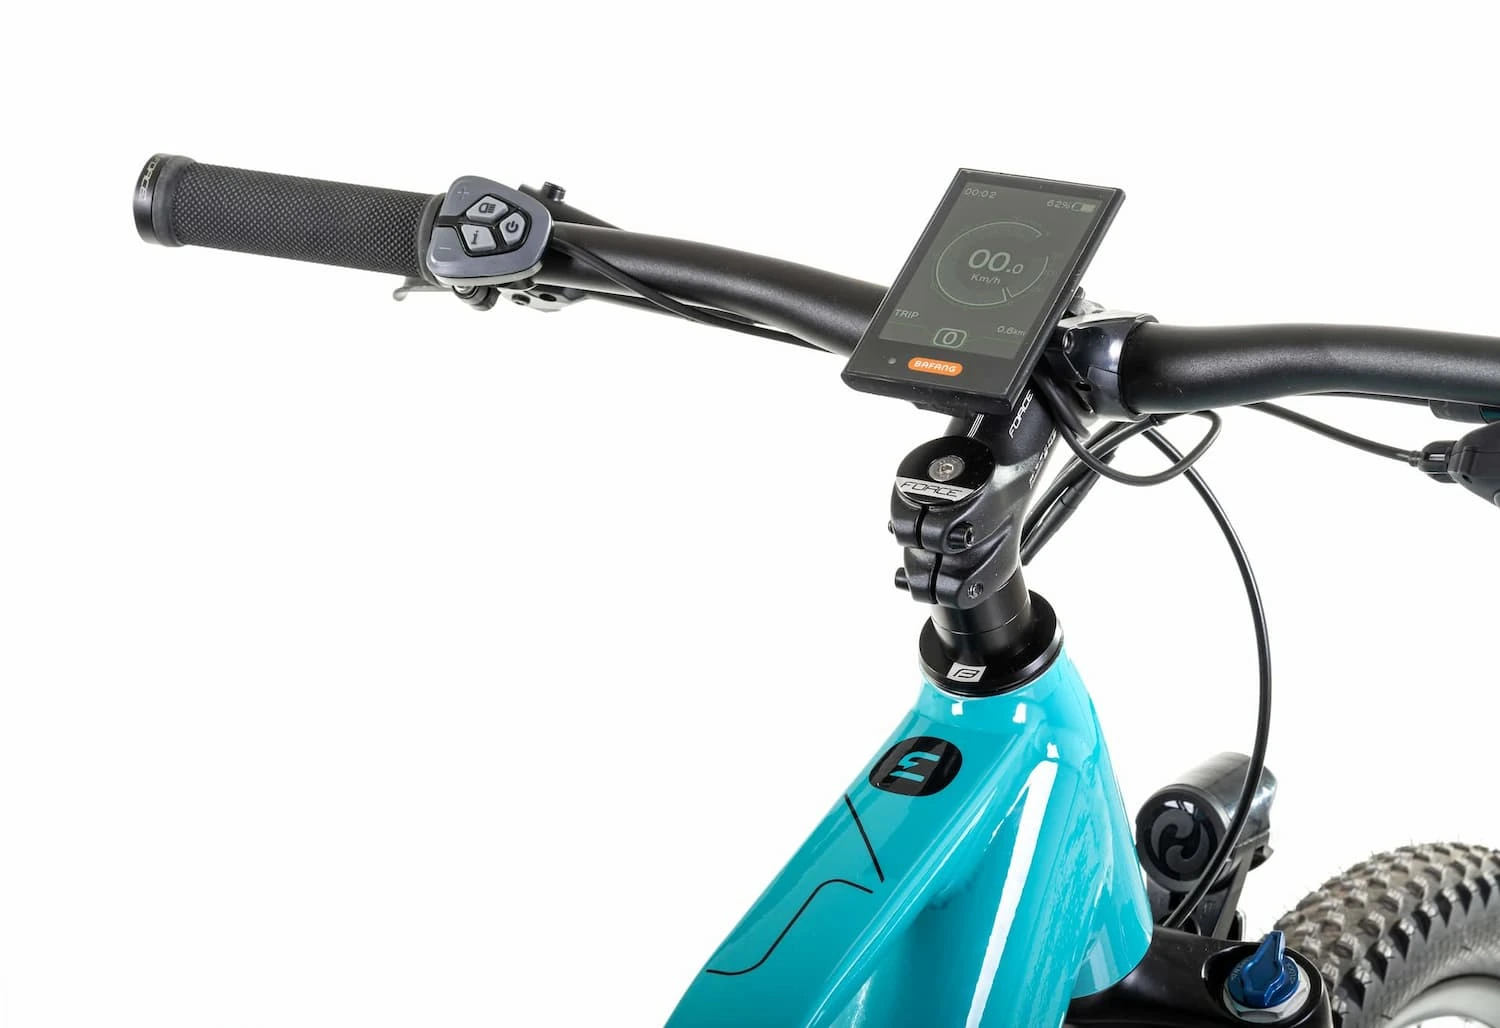 VTT Electrique Econic One Cross-country Smart M 44cm turquoise